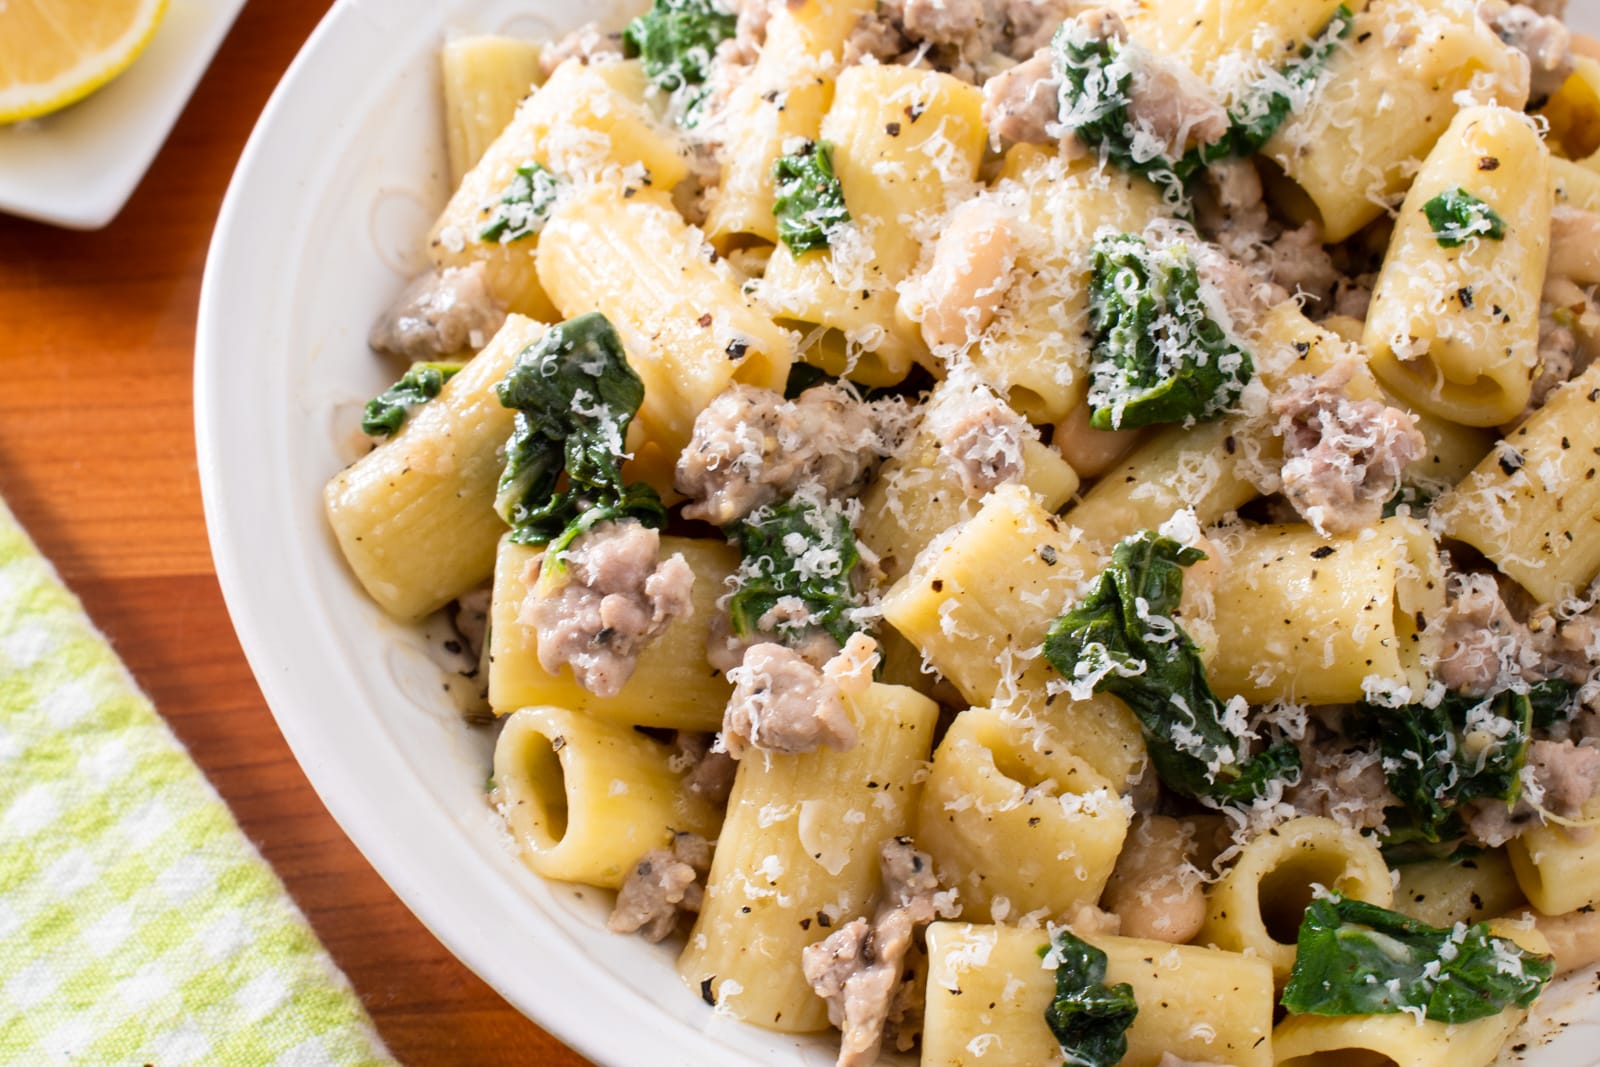 Rigatoni with Sausage, Beans, and Greens